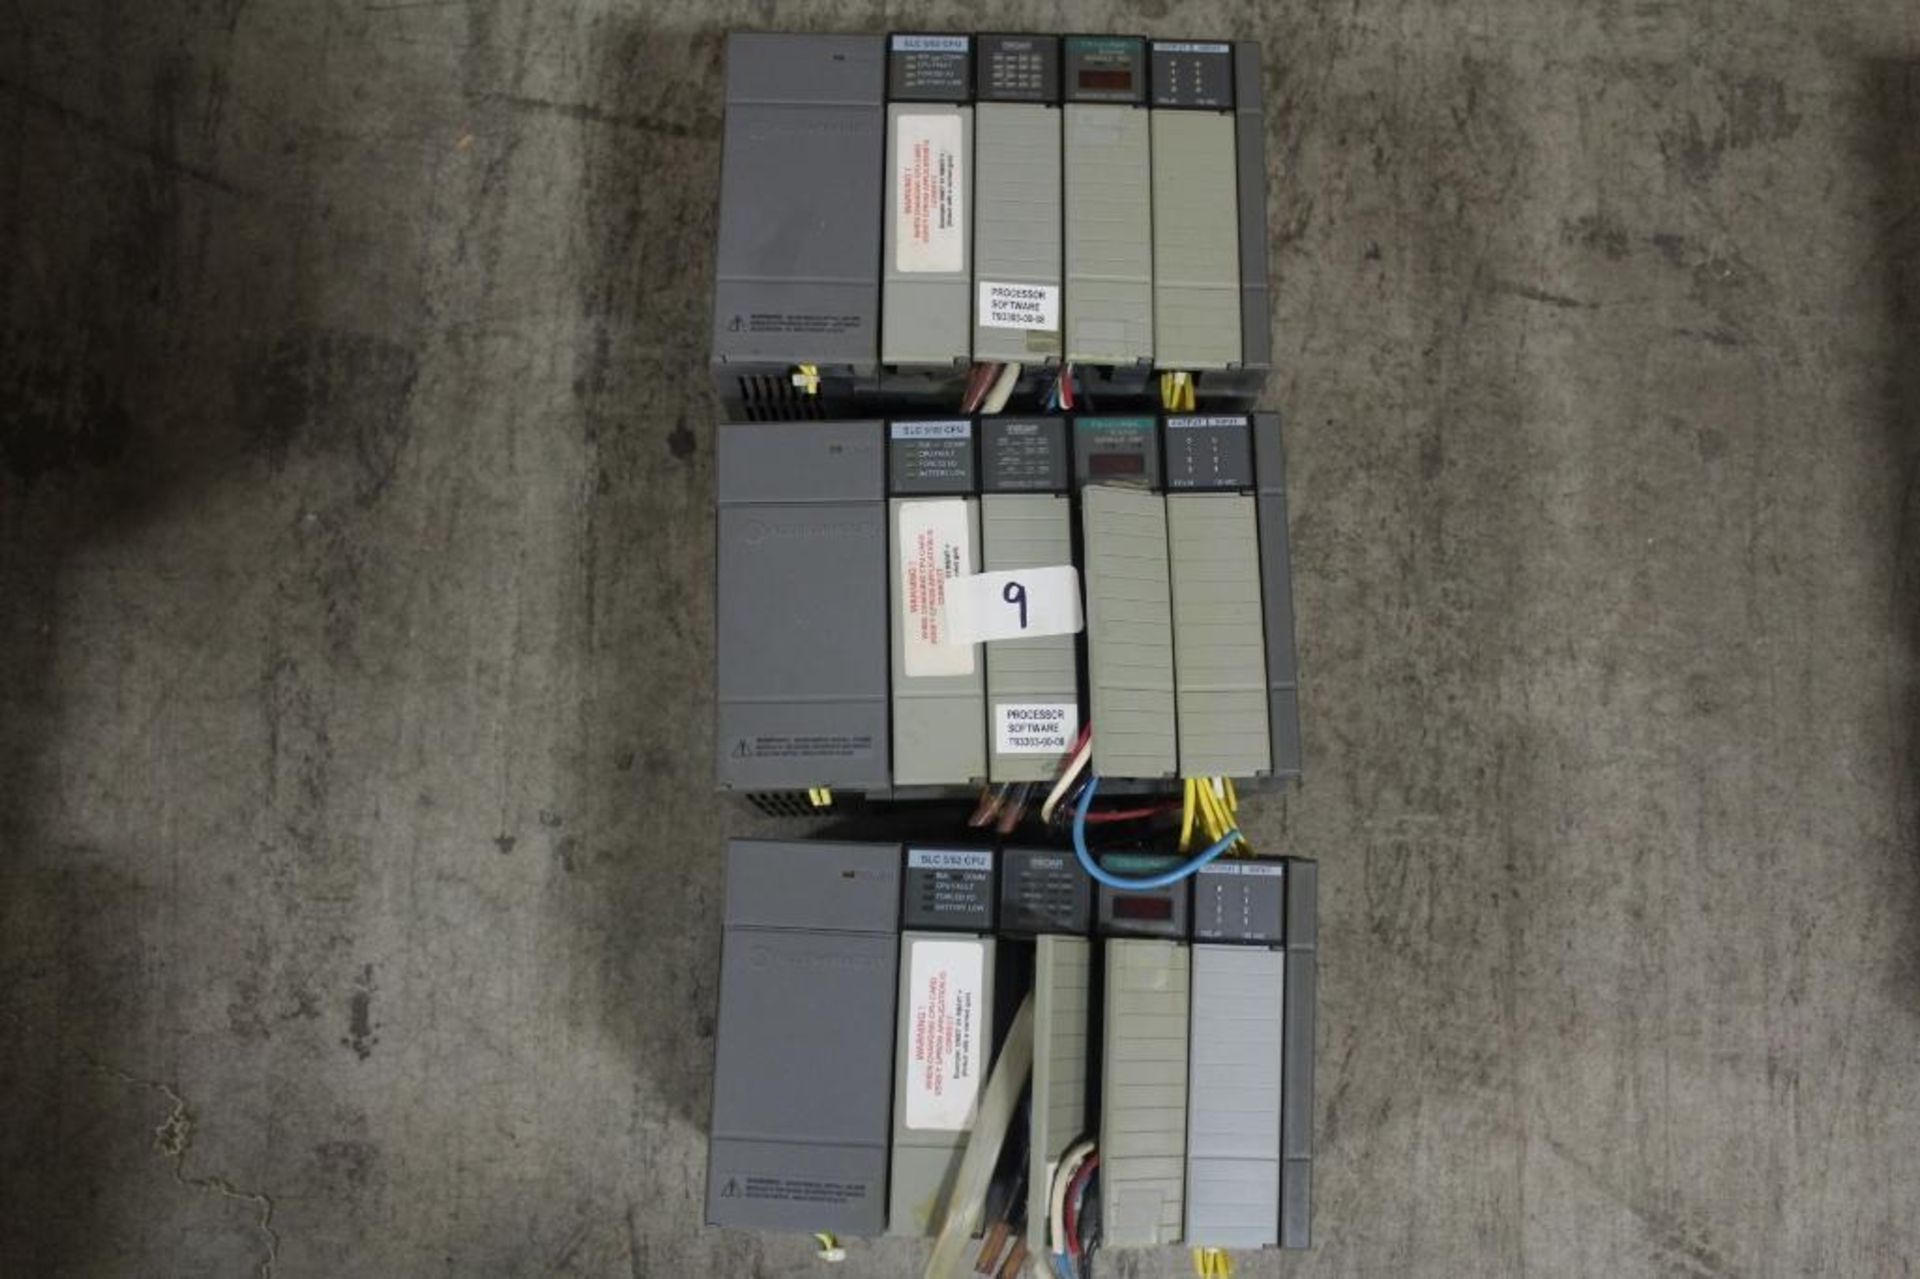 (Lot of 3) Allen-Bradley 1746-A4 Rack w/ 1746-P1 Power Supply, SLC 5/02 Processor, and Various Cards